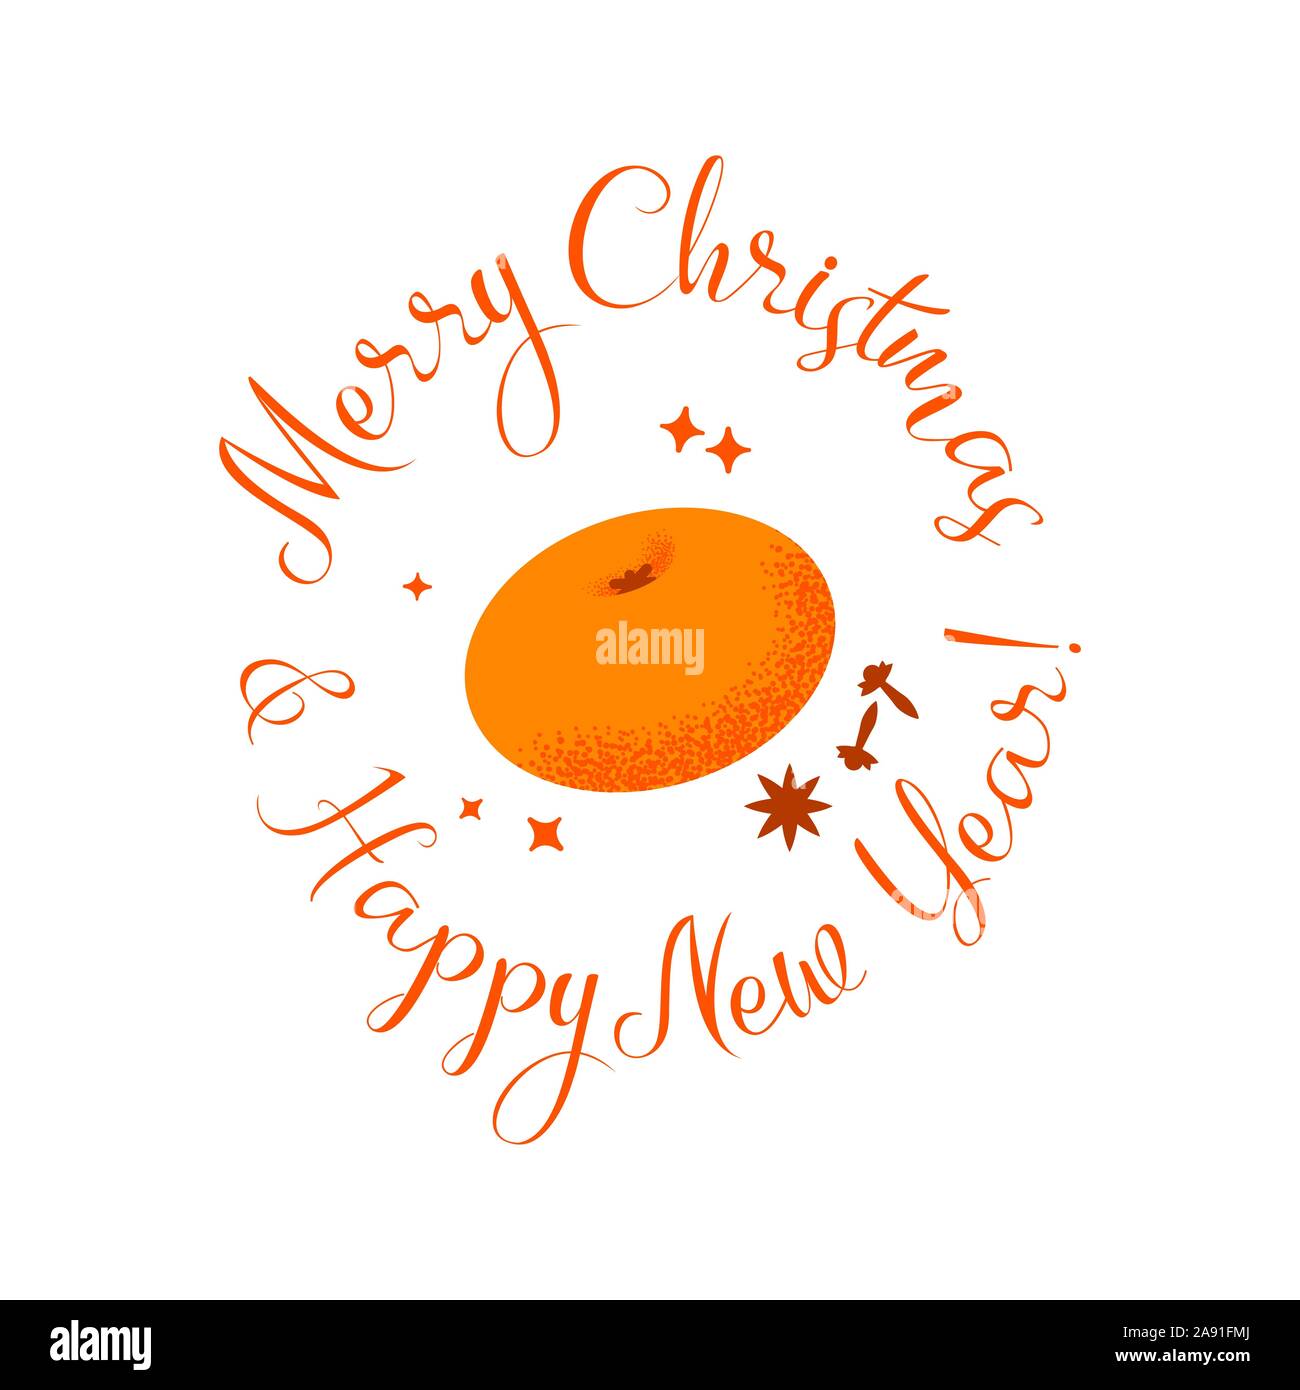 Merry Christmas Greeting Card With Greeting Lettering And Happy New Year Tasty Juicy Tangerine Desegn Element In Flat Noise Style Stock Vector Image Art Alamy